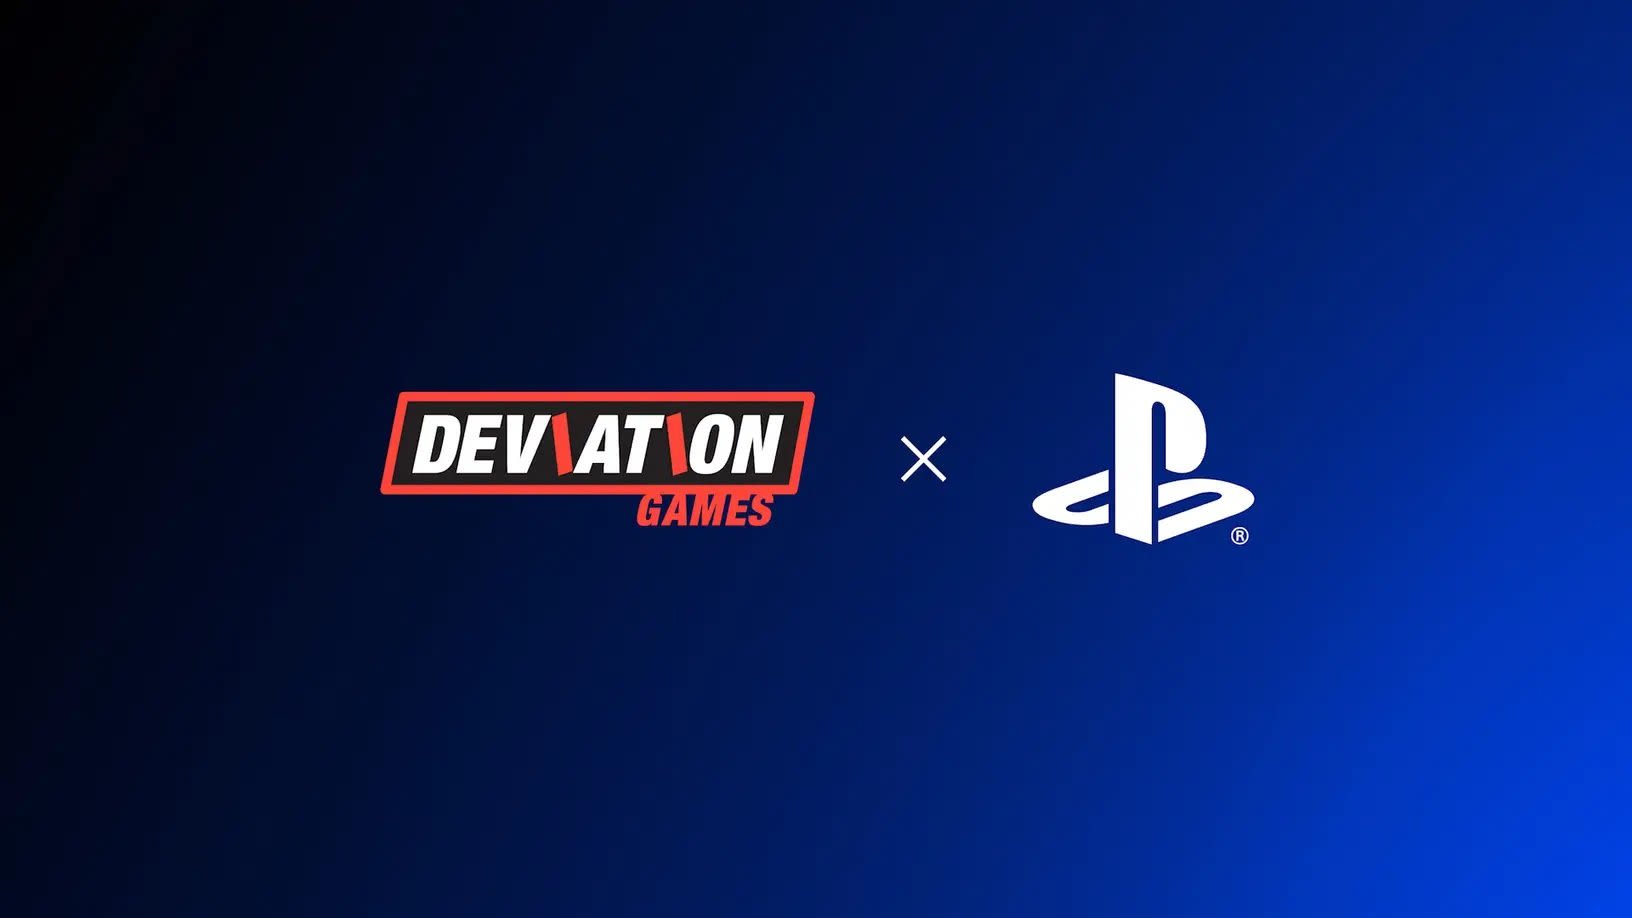 Sony reportedly forms studio with former Deviation Games devs | VGC